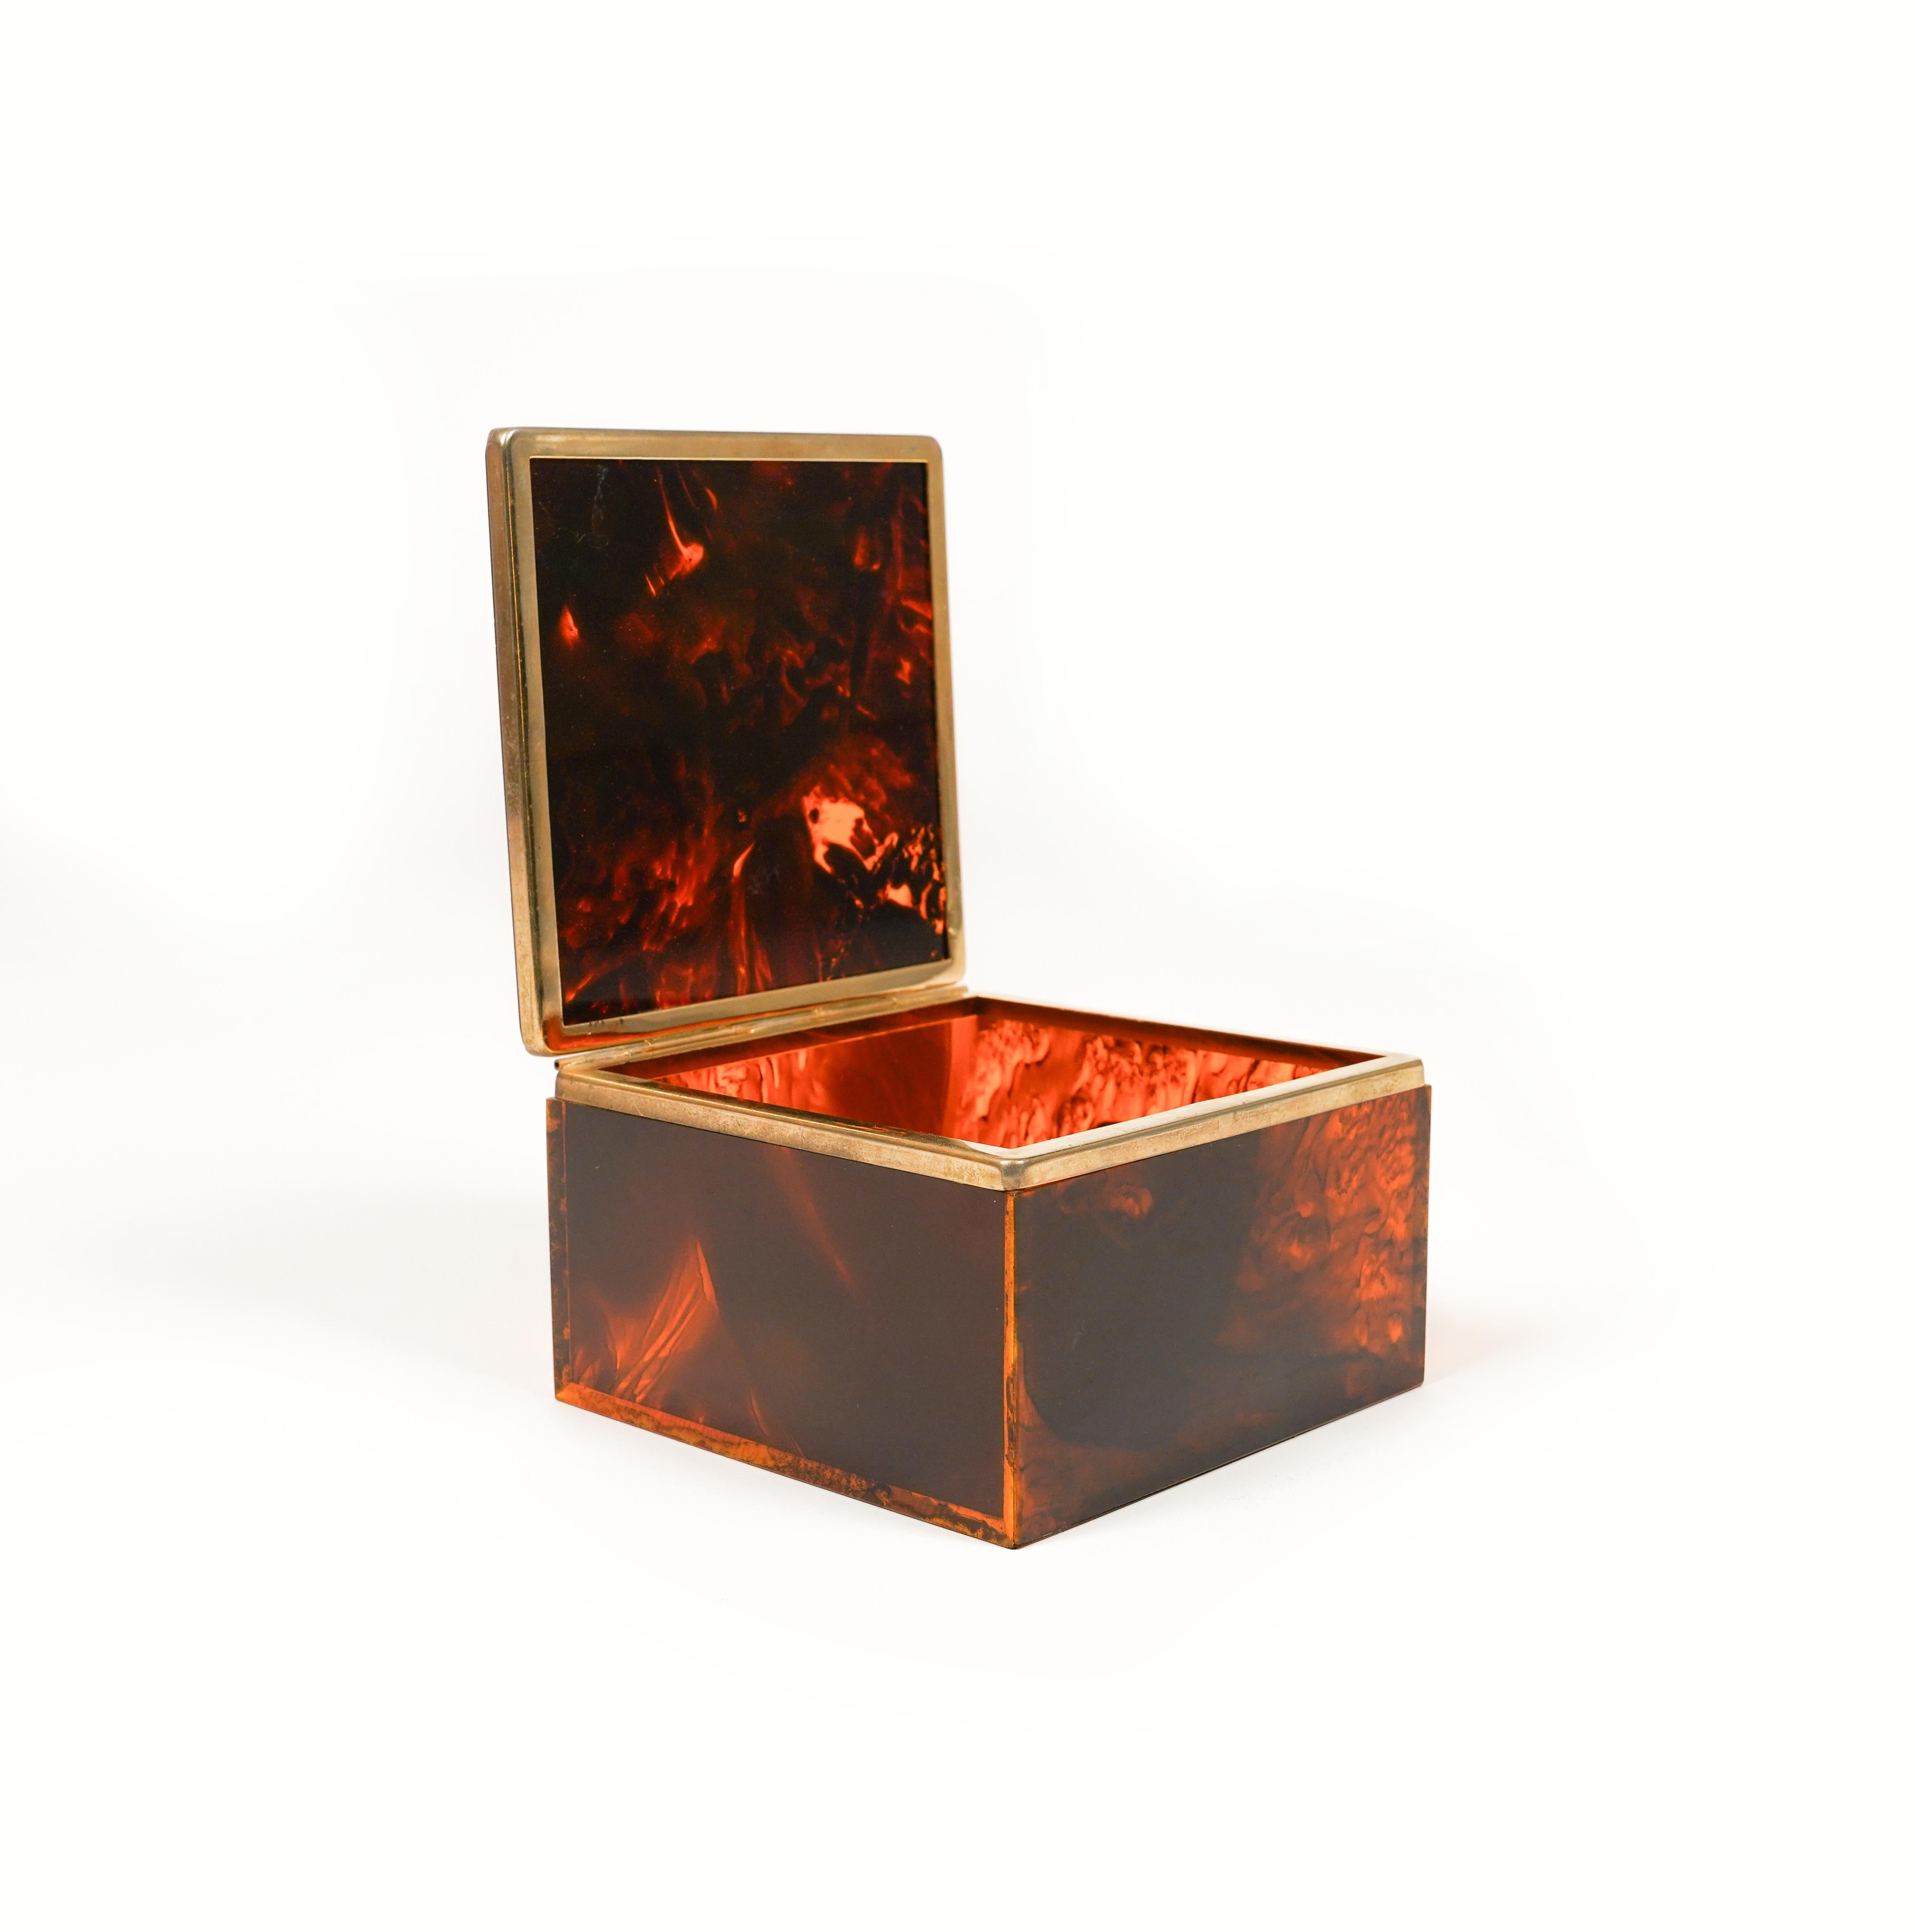 Midcentury amazing squared decorative jewelry box in tortoiseshell-effect lucite in Christian Dior style.

Made in Italy in the 1980s.

Perfect desk object or gift idea.